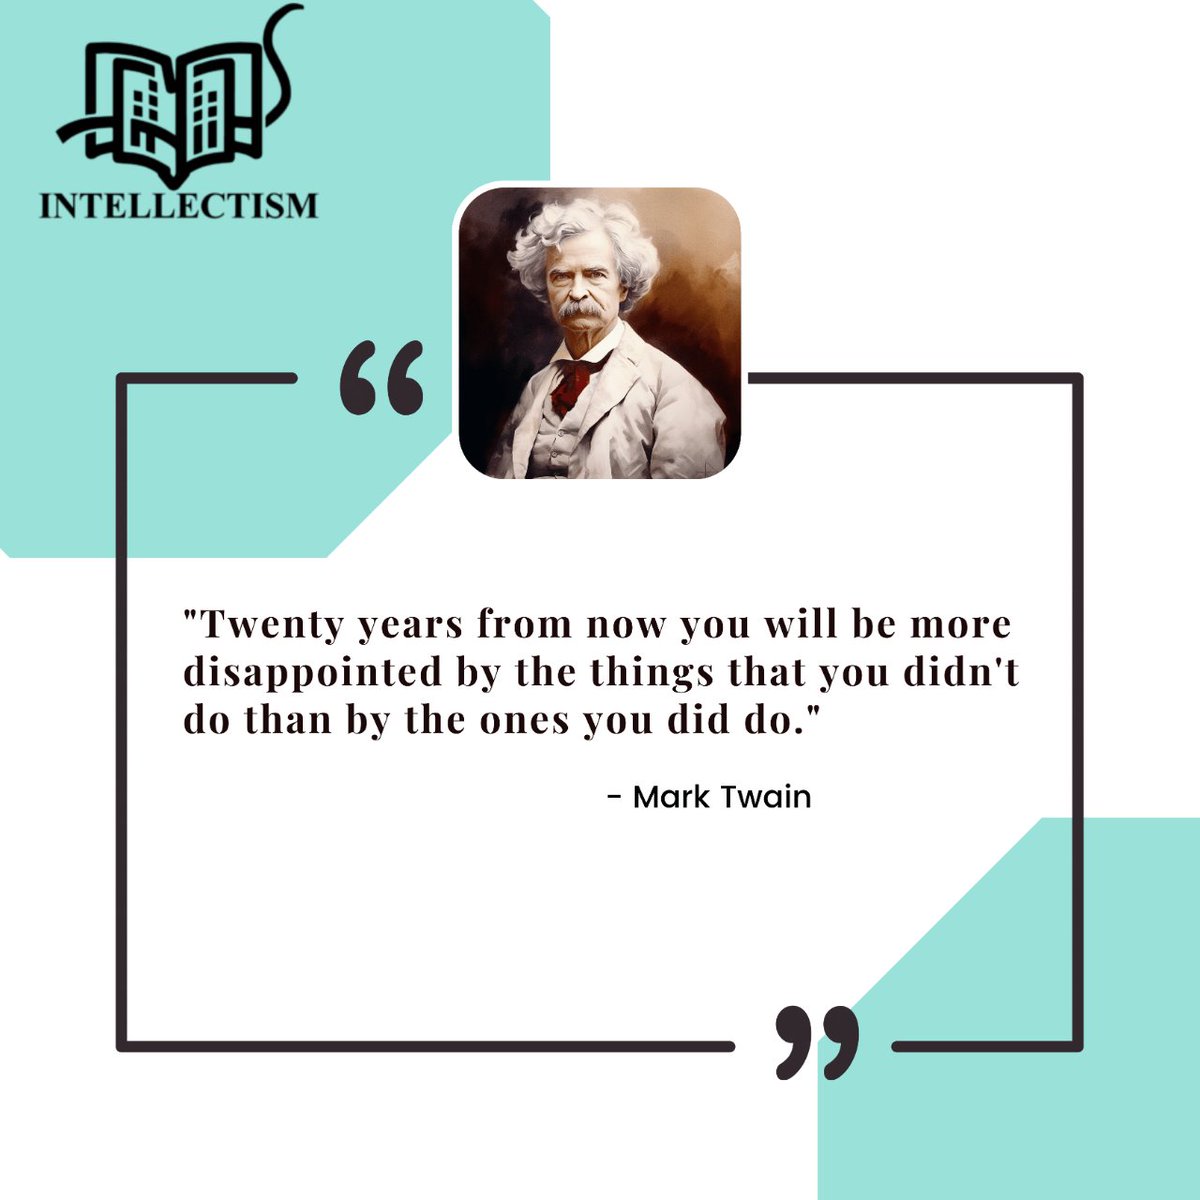 'Twenty years from now...you will be more disappointed by the things that you didn't do.' - (Not Mark Twain, but still!)

What will your 'what if' be?  

#LiveAdventurously #NoRegrets #wednesdaymotivation #MarkTwain